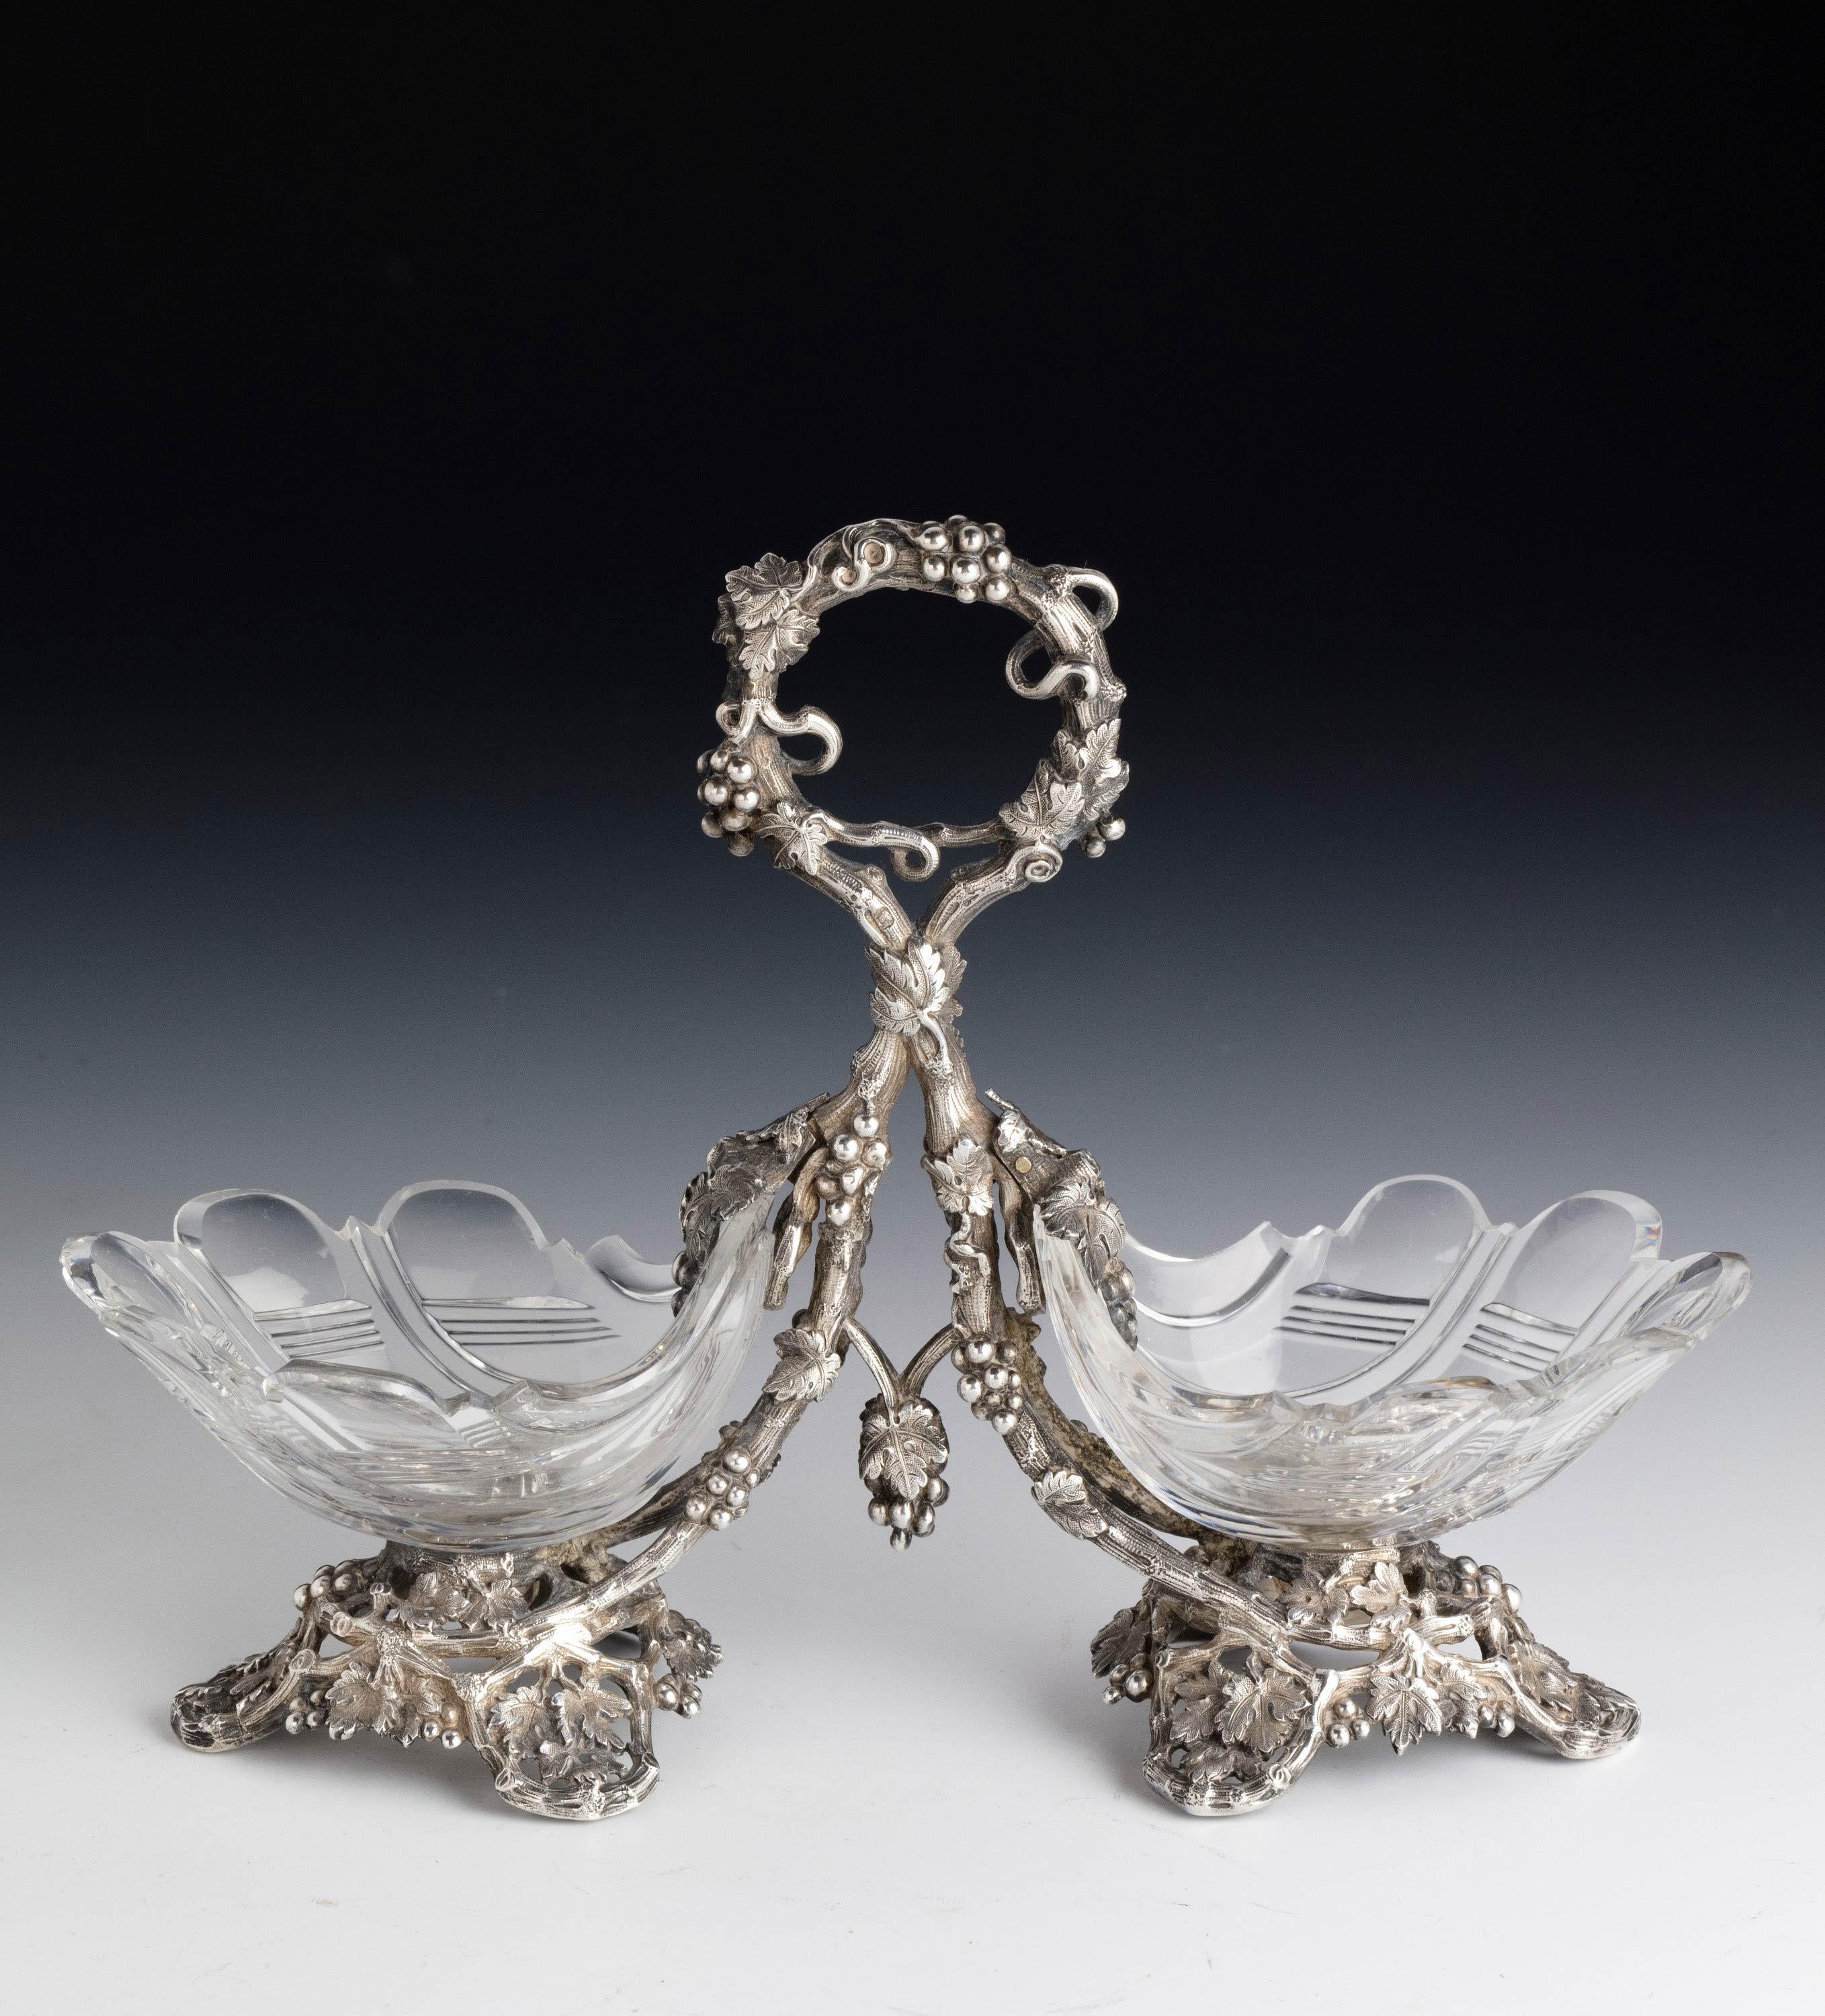 English Attractive Pair of Late 19th Century Cut-Glass Table Salts